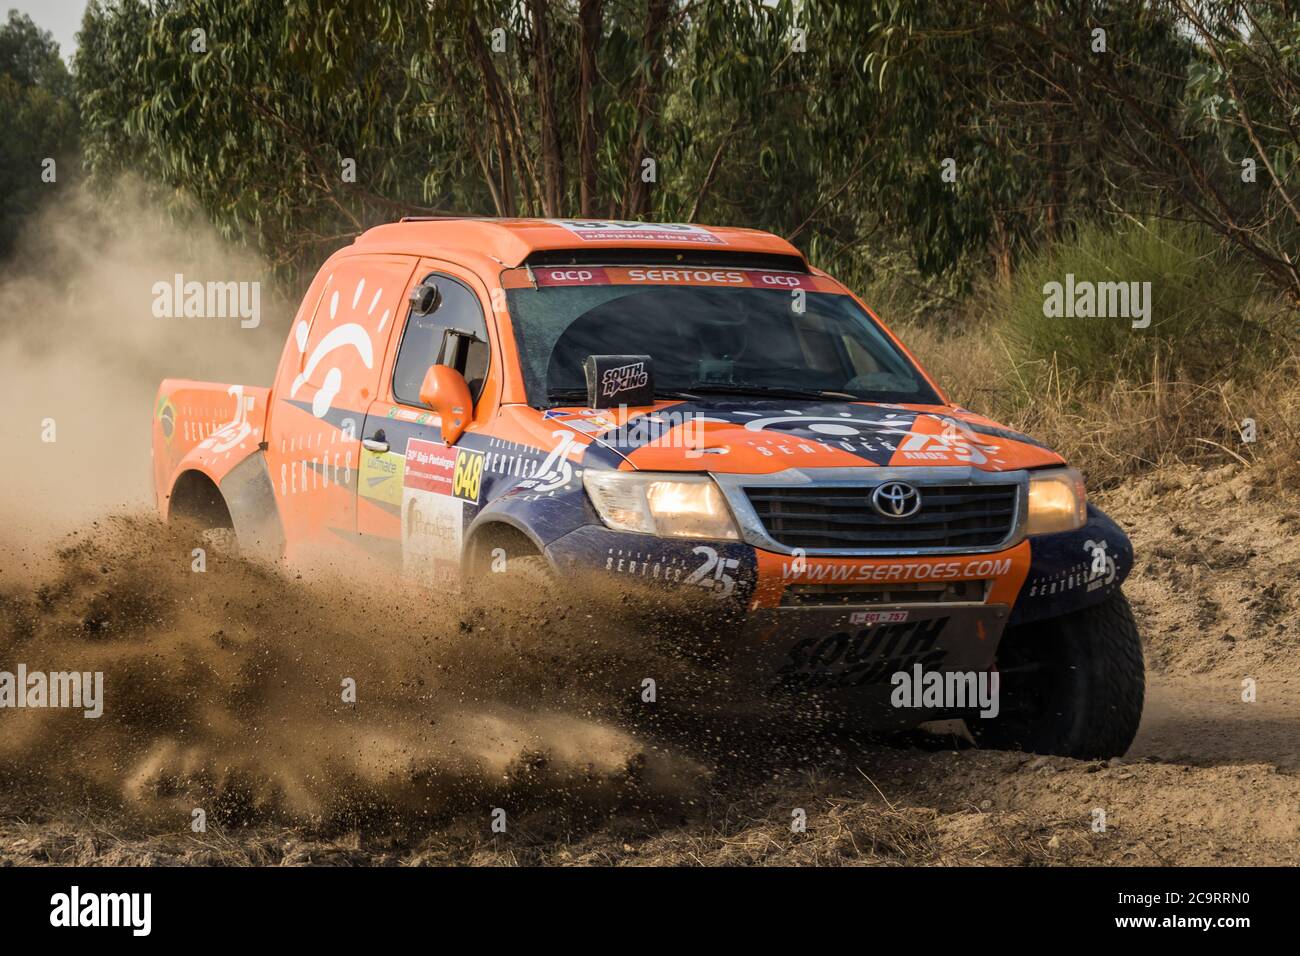 The Toyota pick-up of Marcos de Moraes and Fábio Pedroso races near Alter do Chão, Portugal, during the 30th Baja TT Portalegre off-road competition. Stock Photo